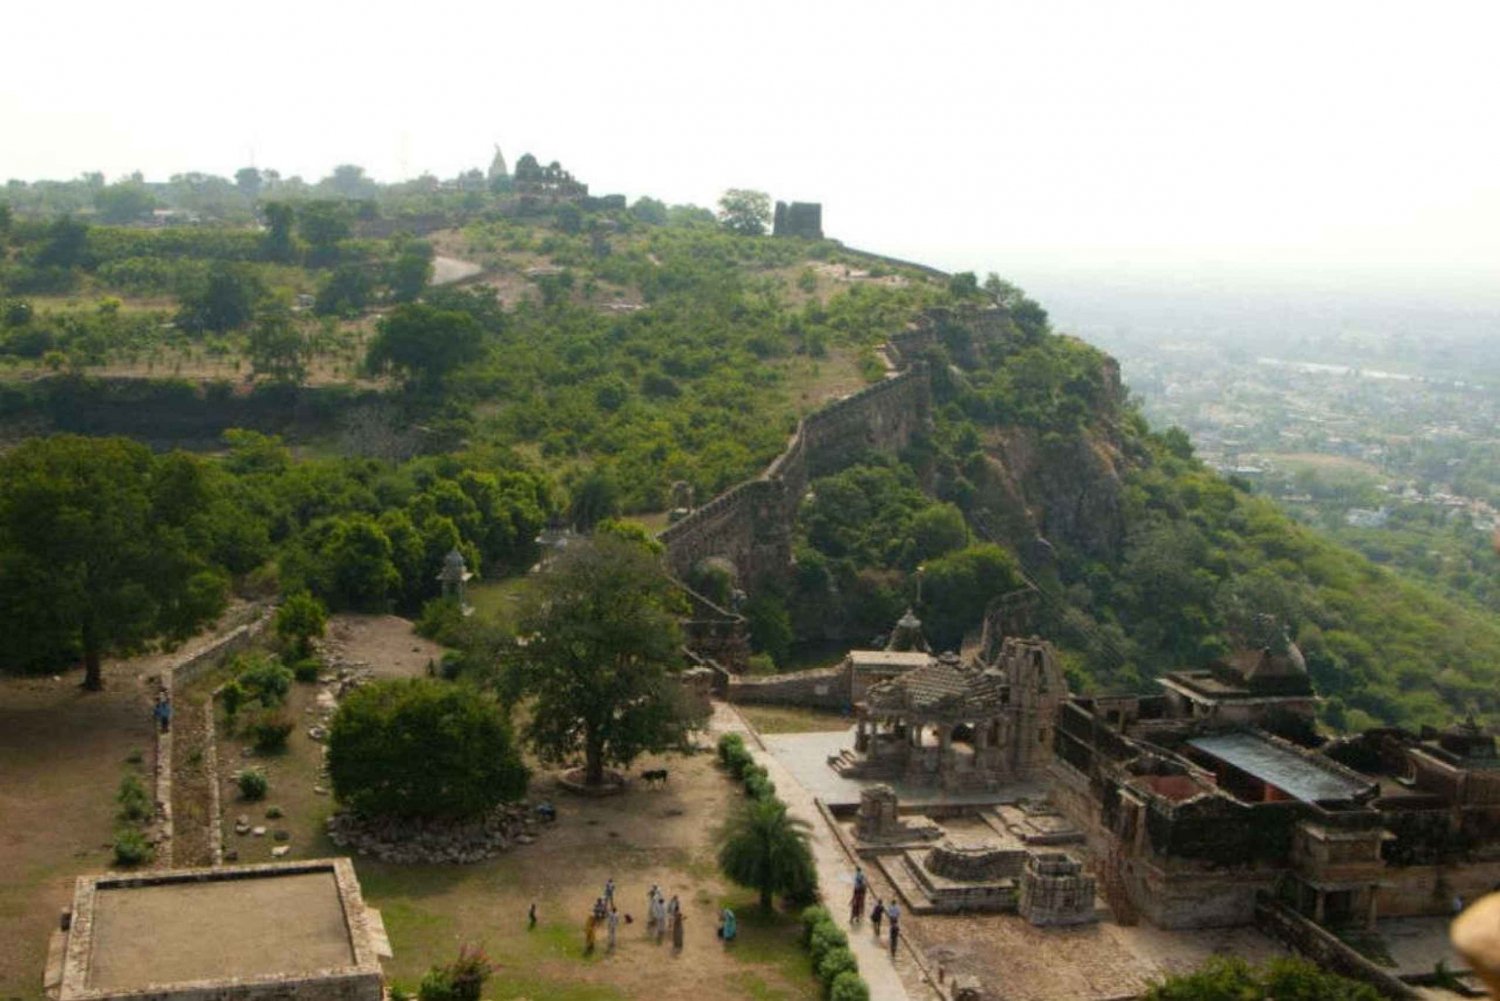 From Udaipur: Private Day Trip to Chittorgarh Fort